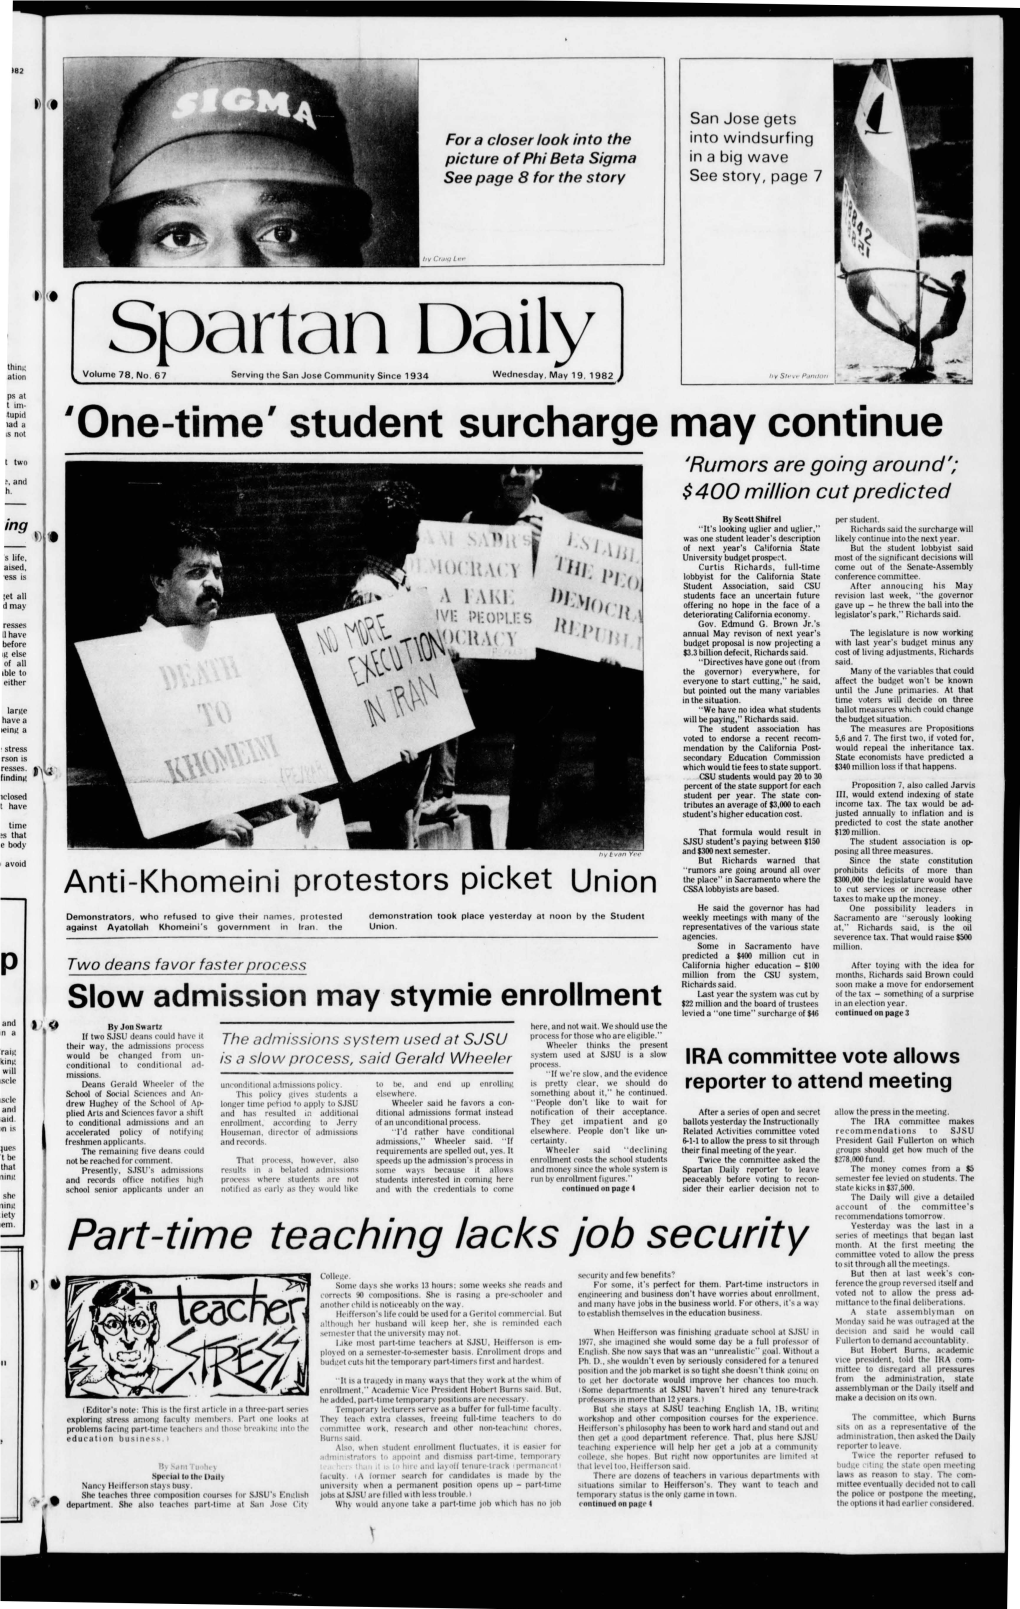 Spartan Daily Thing .Ation Volume 78, No 6 1 Serving the San Jose Community Since 1934 Wednesday, May 19, 1982